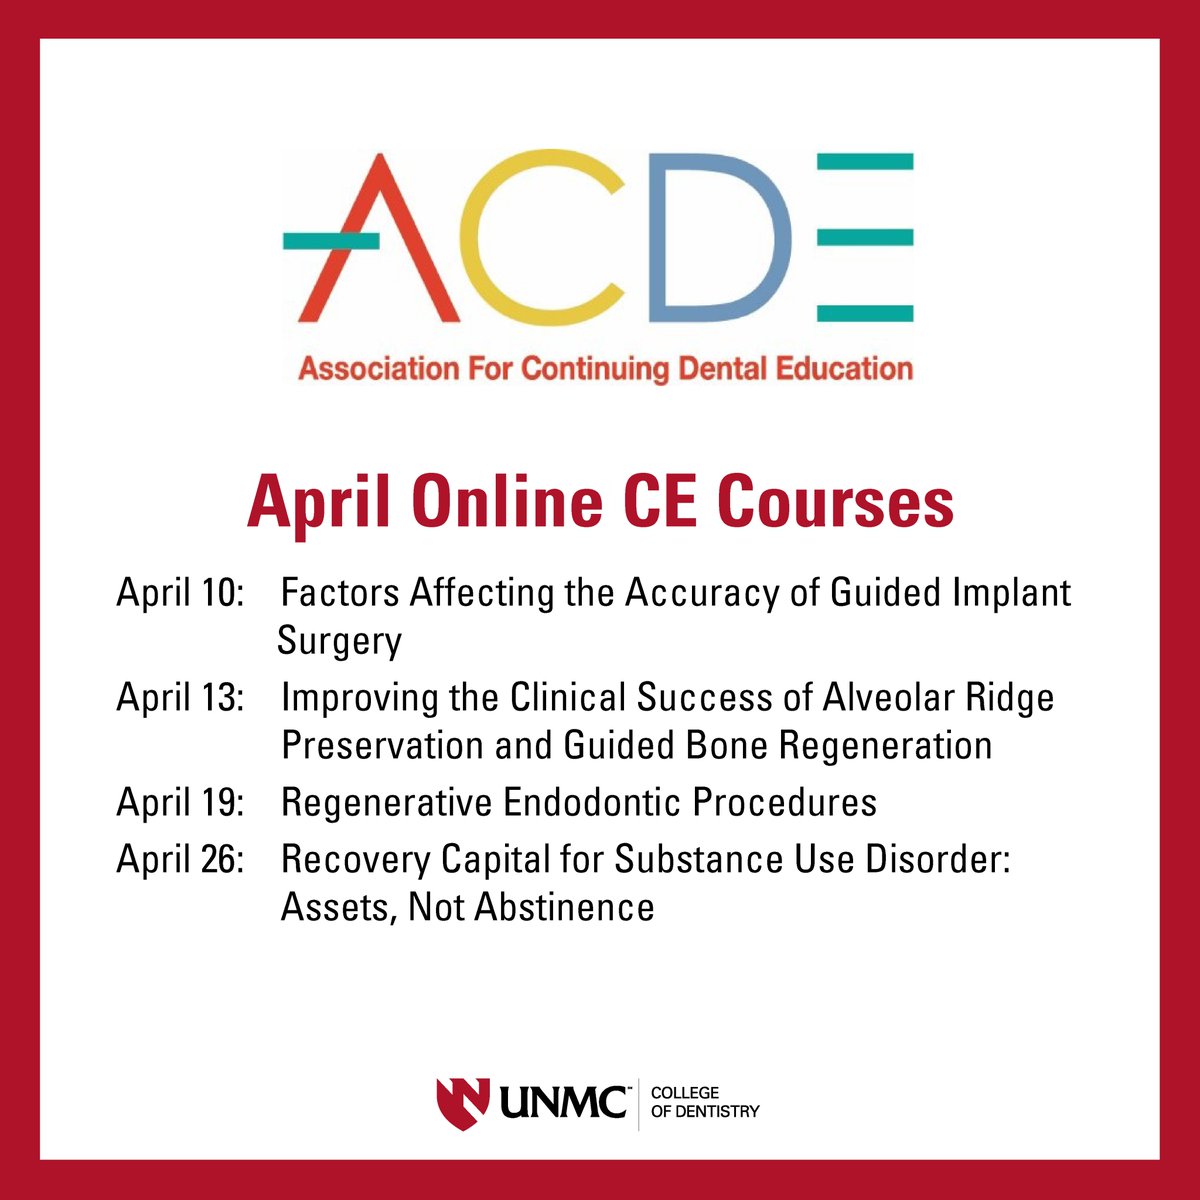 The College of Dentistry has partnered with the Association for Continuing Dental Education to offer online continuing education courses to meet every dental health care professional’s interests & schedule. See course descriptions & register here: bit.ly/4cJVf7k #iamunmc